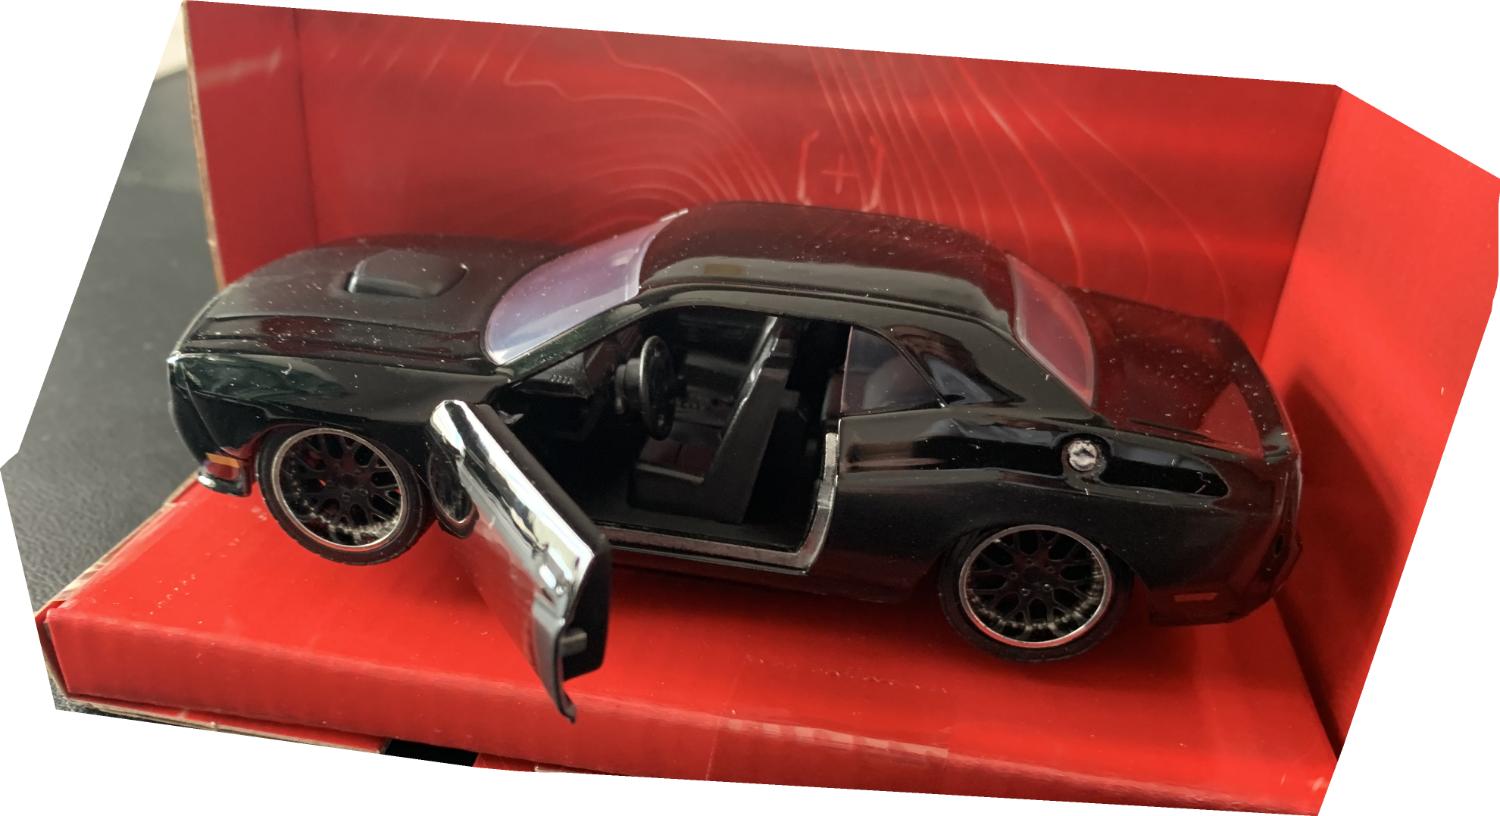 Fast and Furious 6 Dom’s Dodge Challenger SRT8 in black 1:32 scale model from Jada